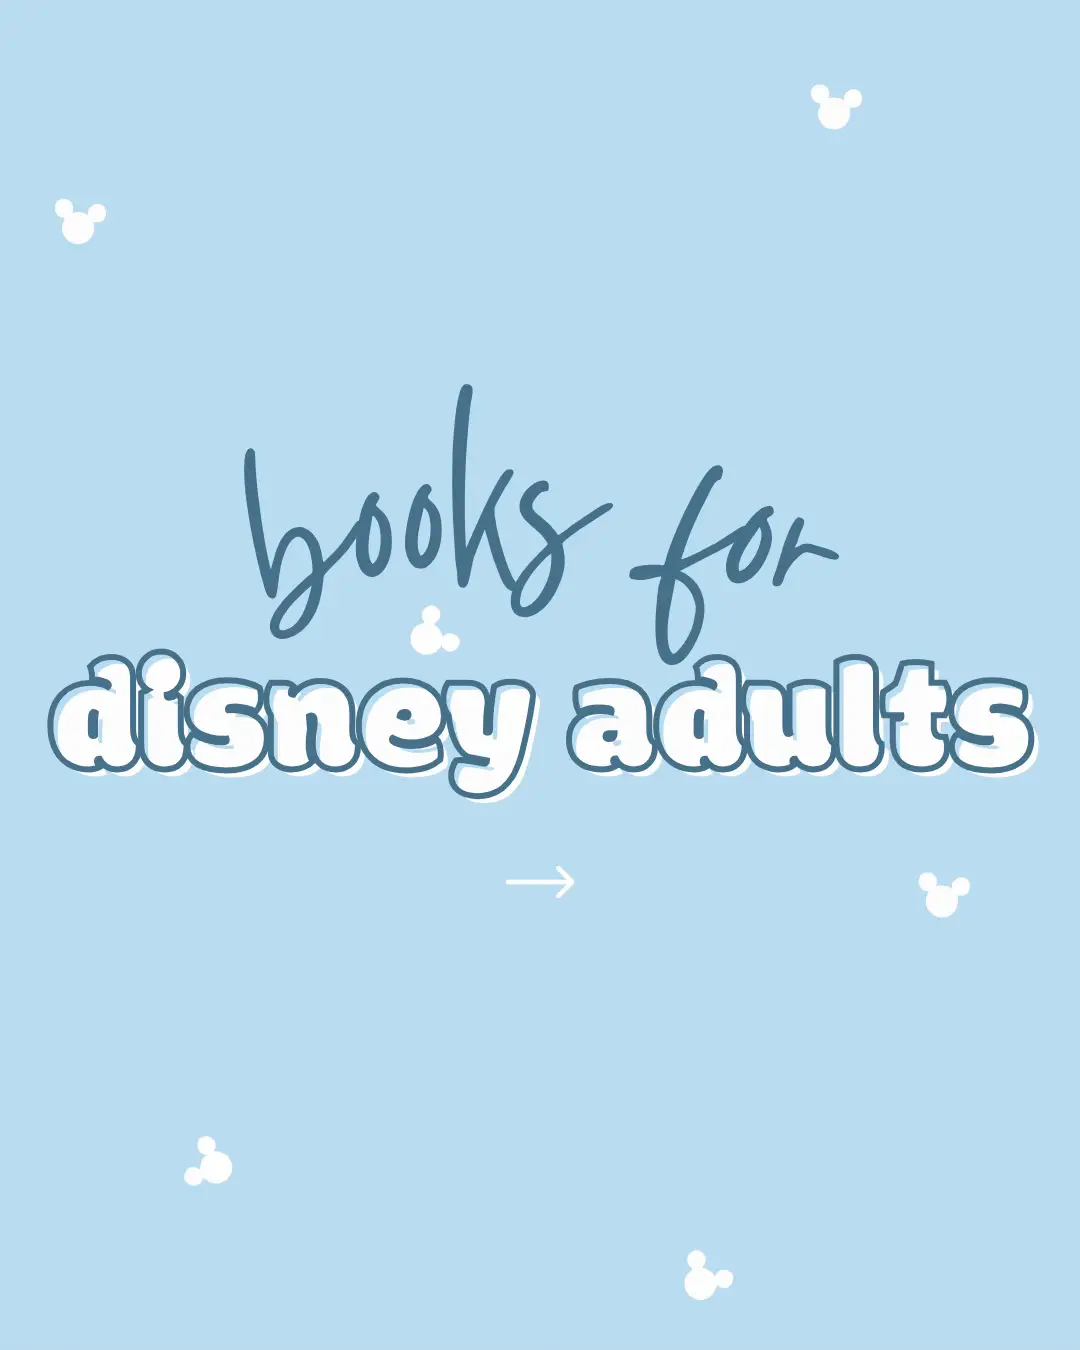  A book cover for a book titled "books for disney adults".